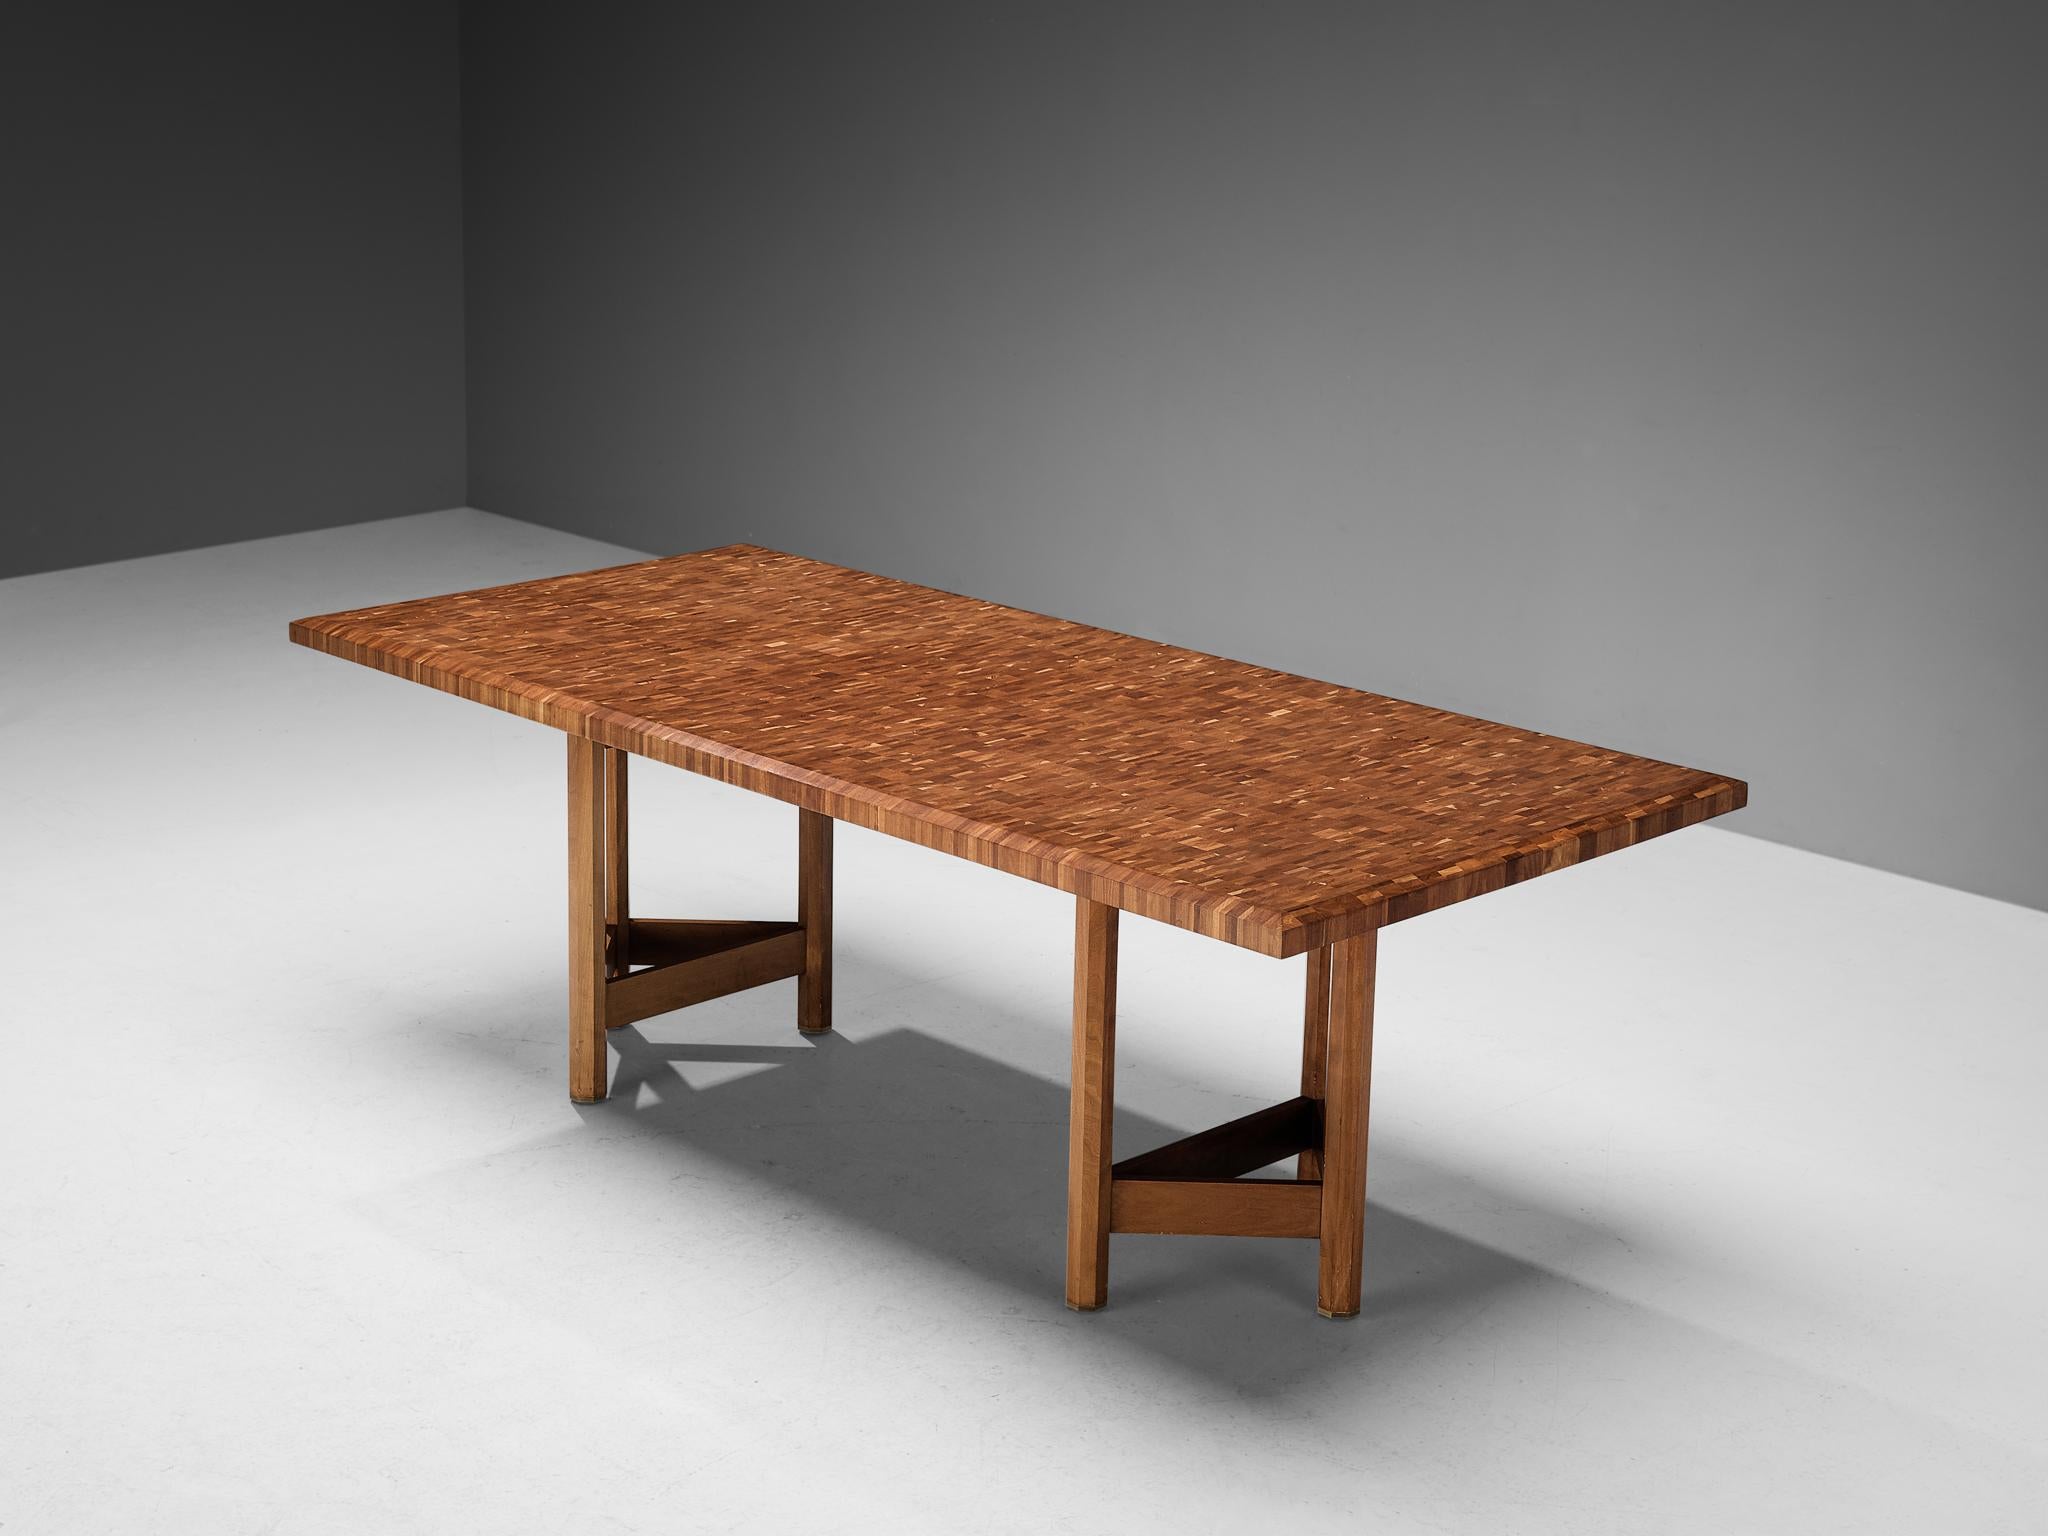 Jan Vlug, dining table, walnut, metal, brass, Belgium, 1970s

Glorious and rare dining table with characteristic and stunning executed tabletop. The table is made by Belgian designer Jan Vlug. Apart from the table top that catches the eye, the two